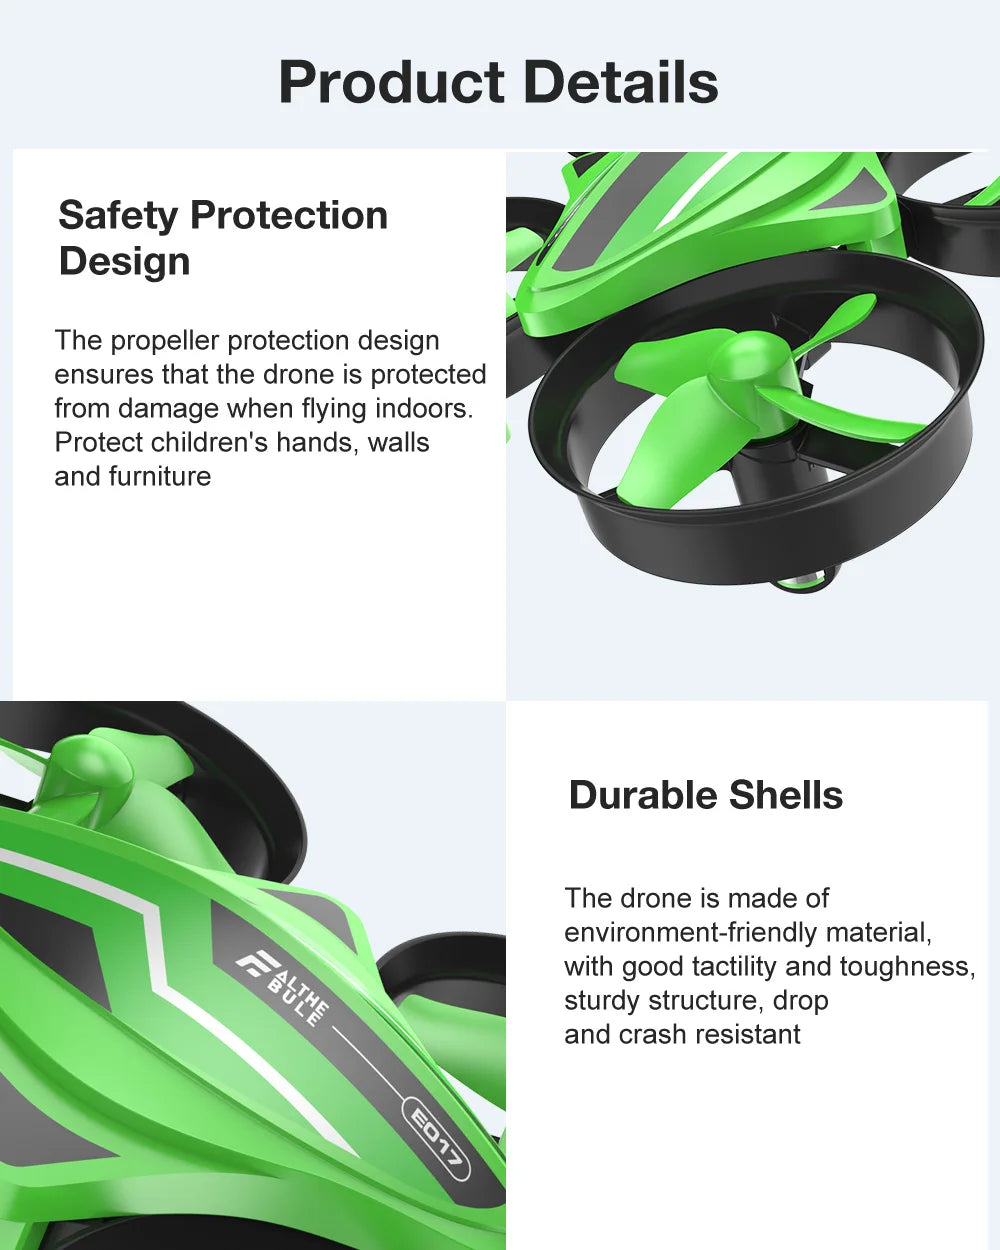 Eachine E017 Mini Drone, the propeller protection design ensures that the drone is protected from damage